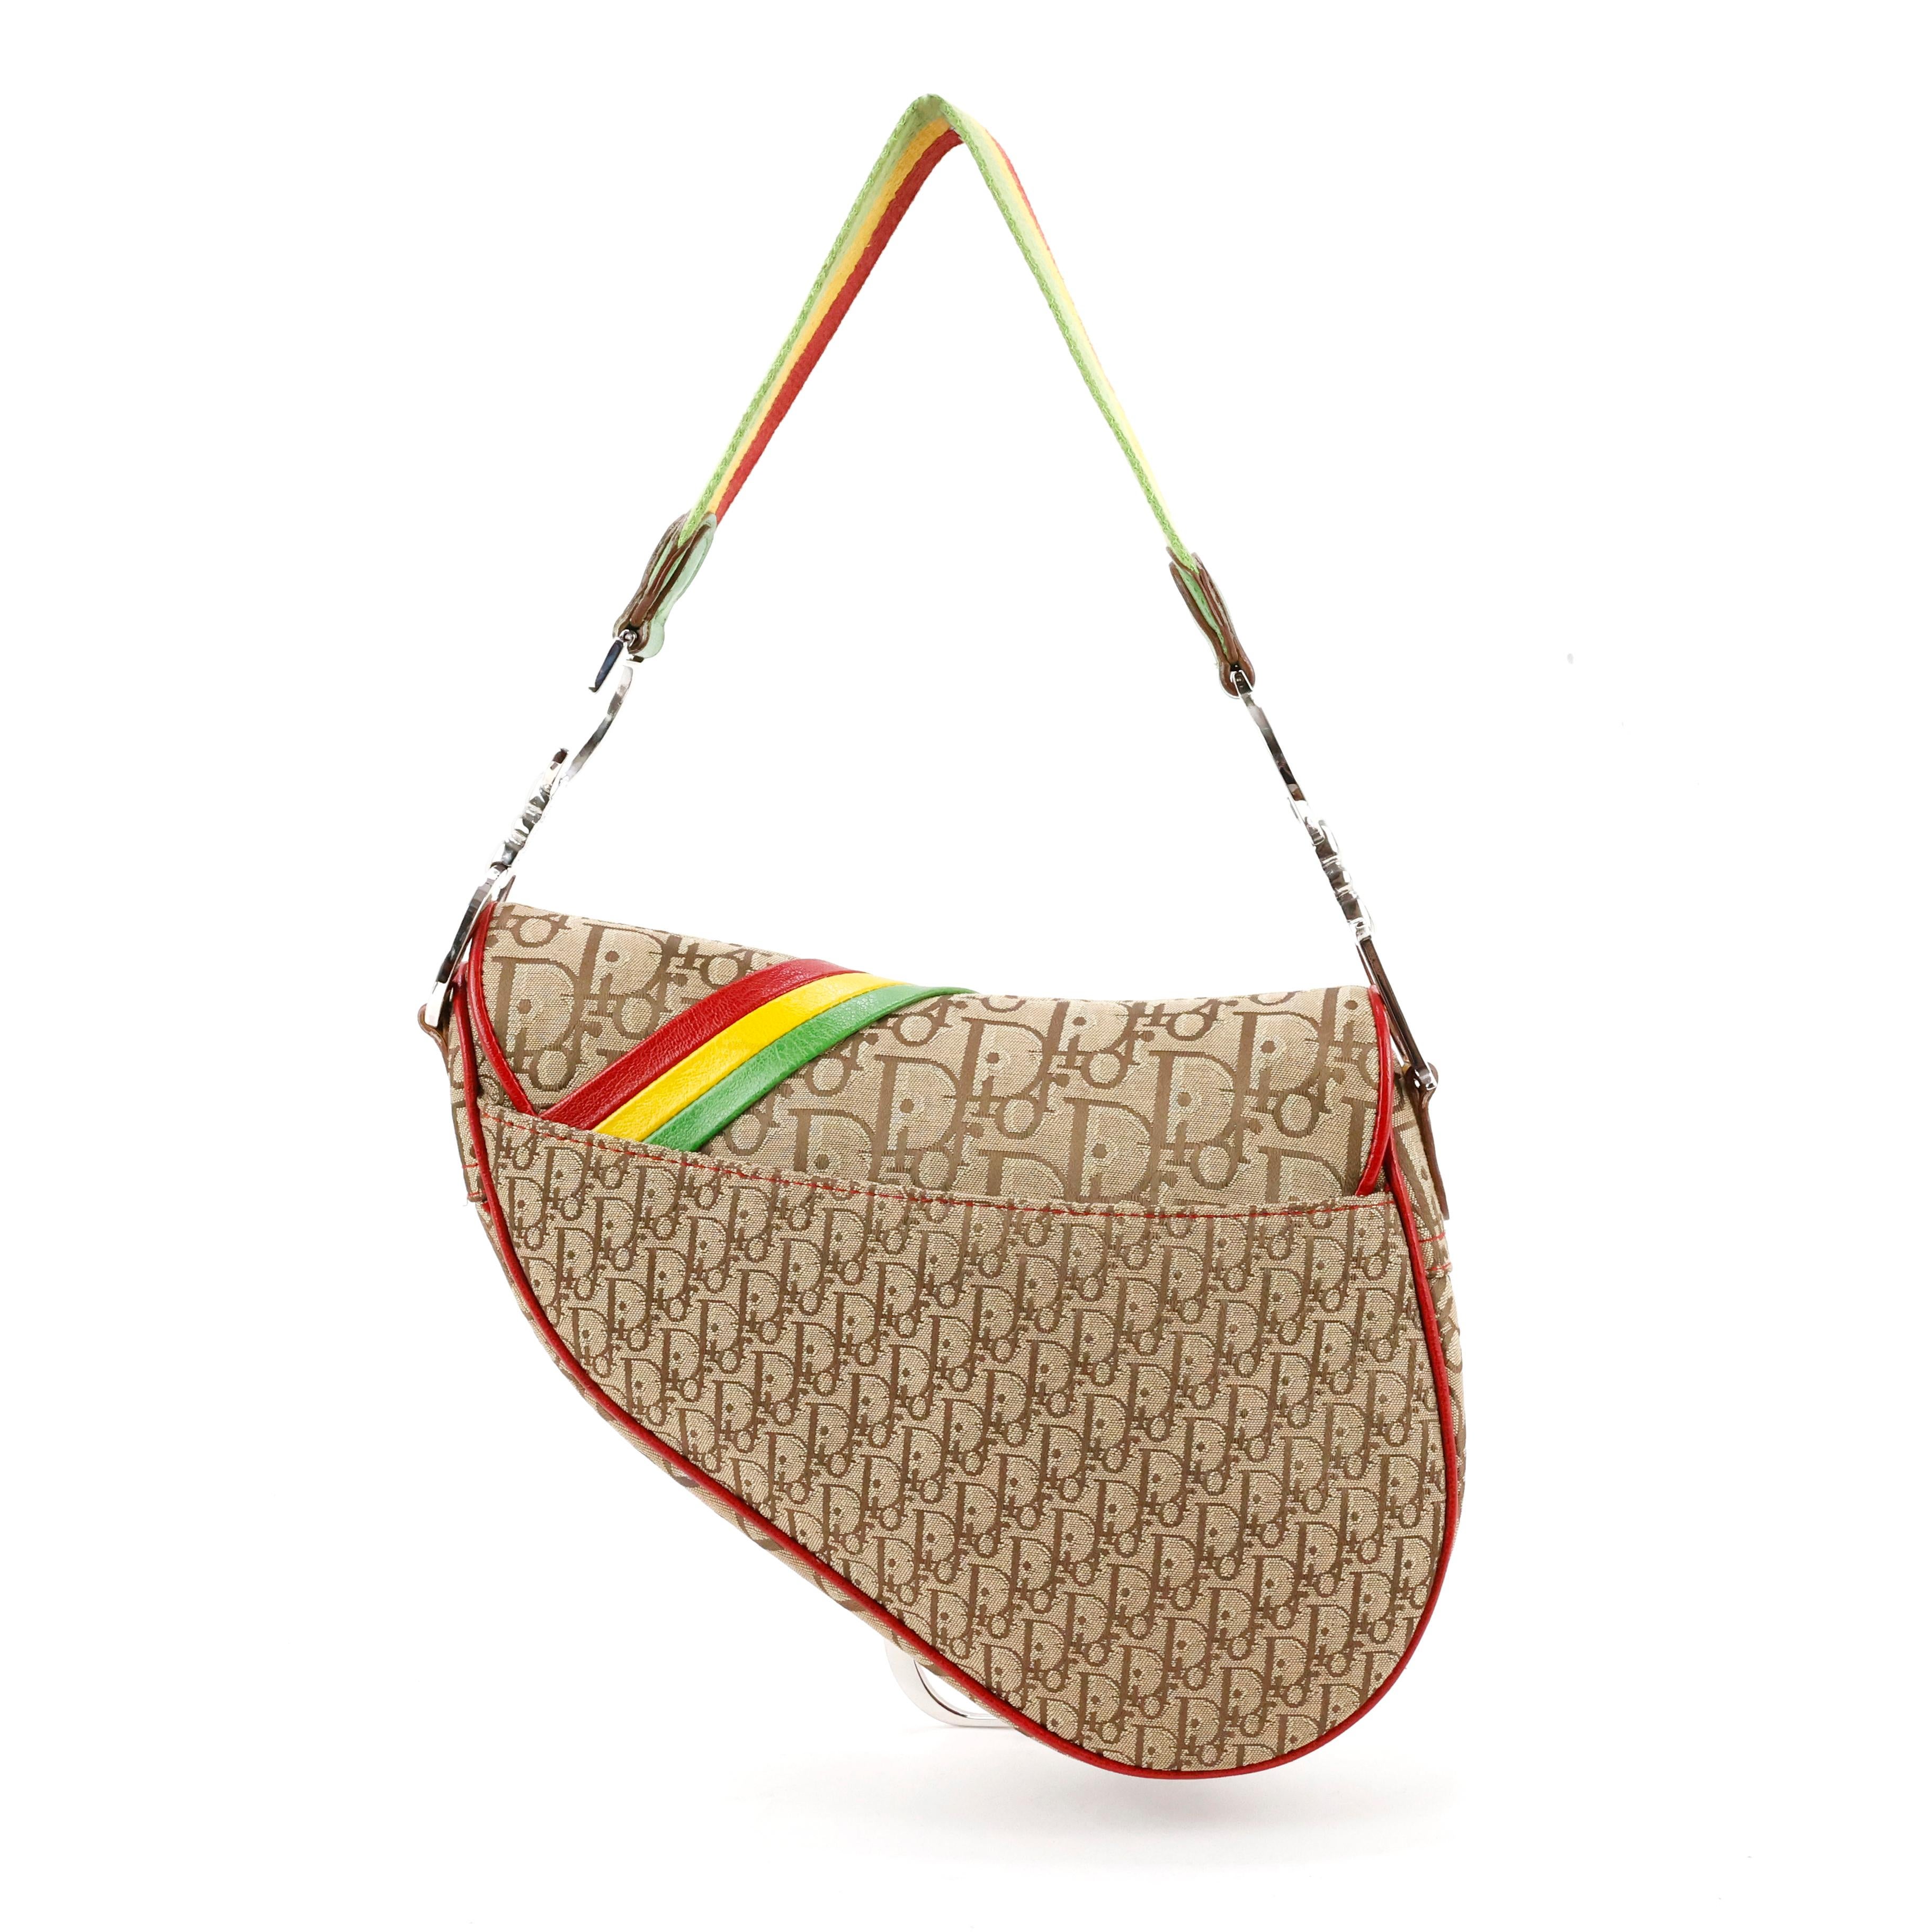 Dior by John Galliano rare rasta saddle bag.


Condition:
Excellent.


Packing/accessories:
Box and dustbag.


Measurements:
24cm x 20cm x 5cm